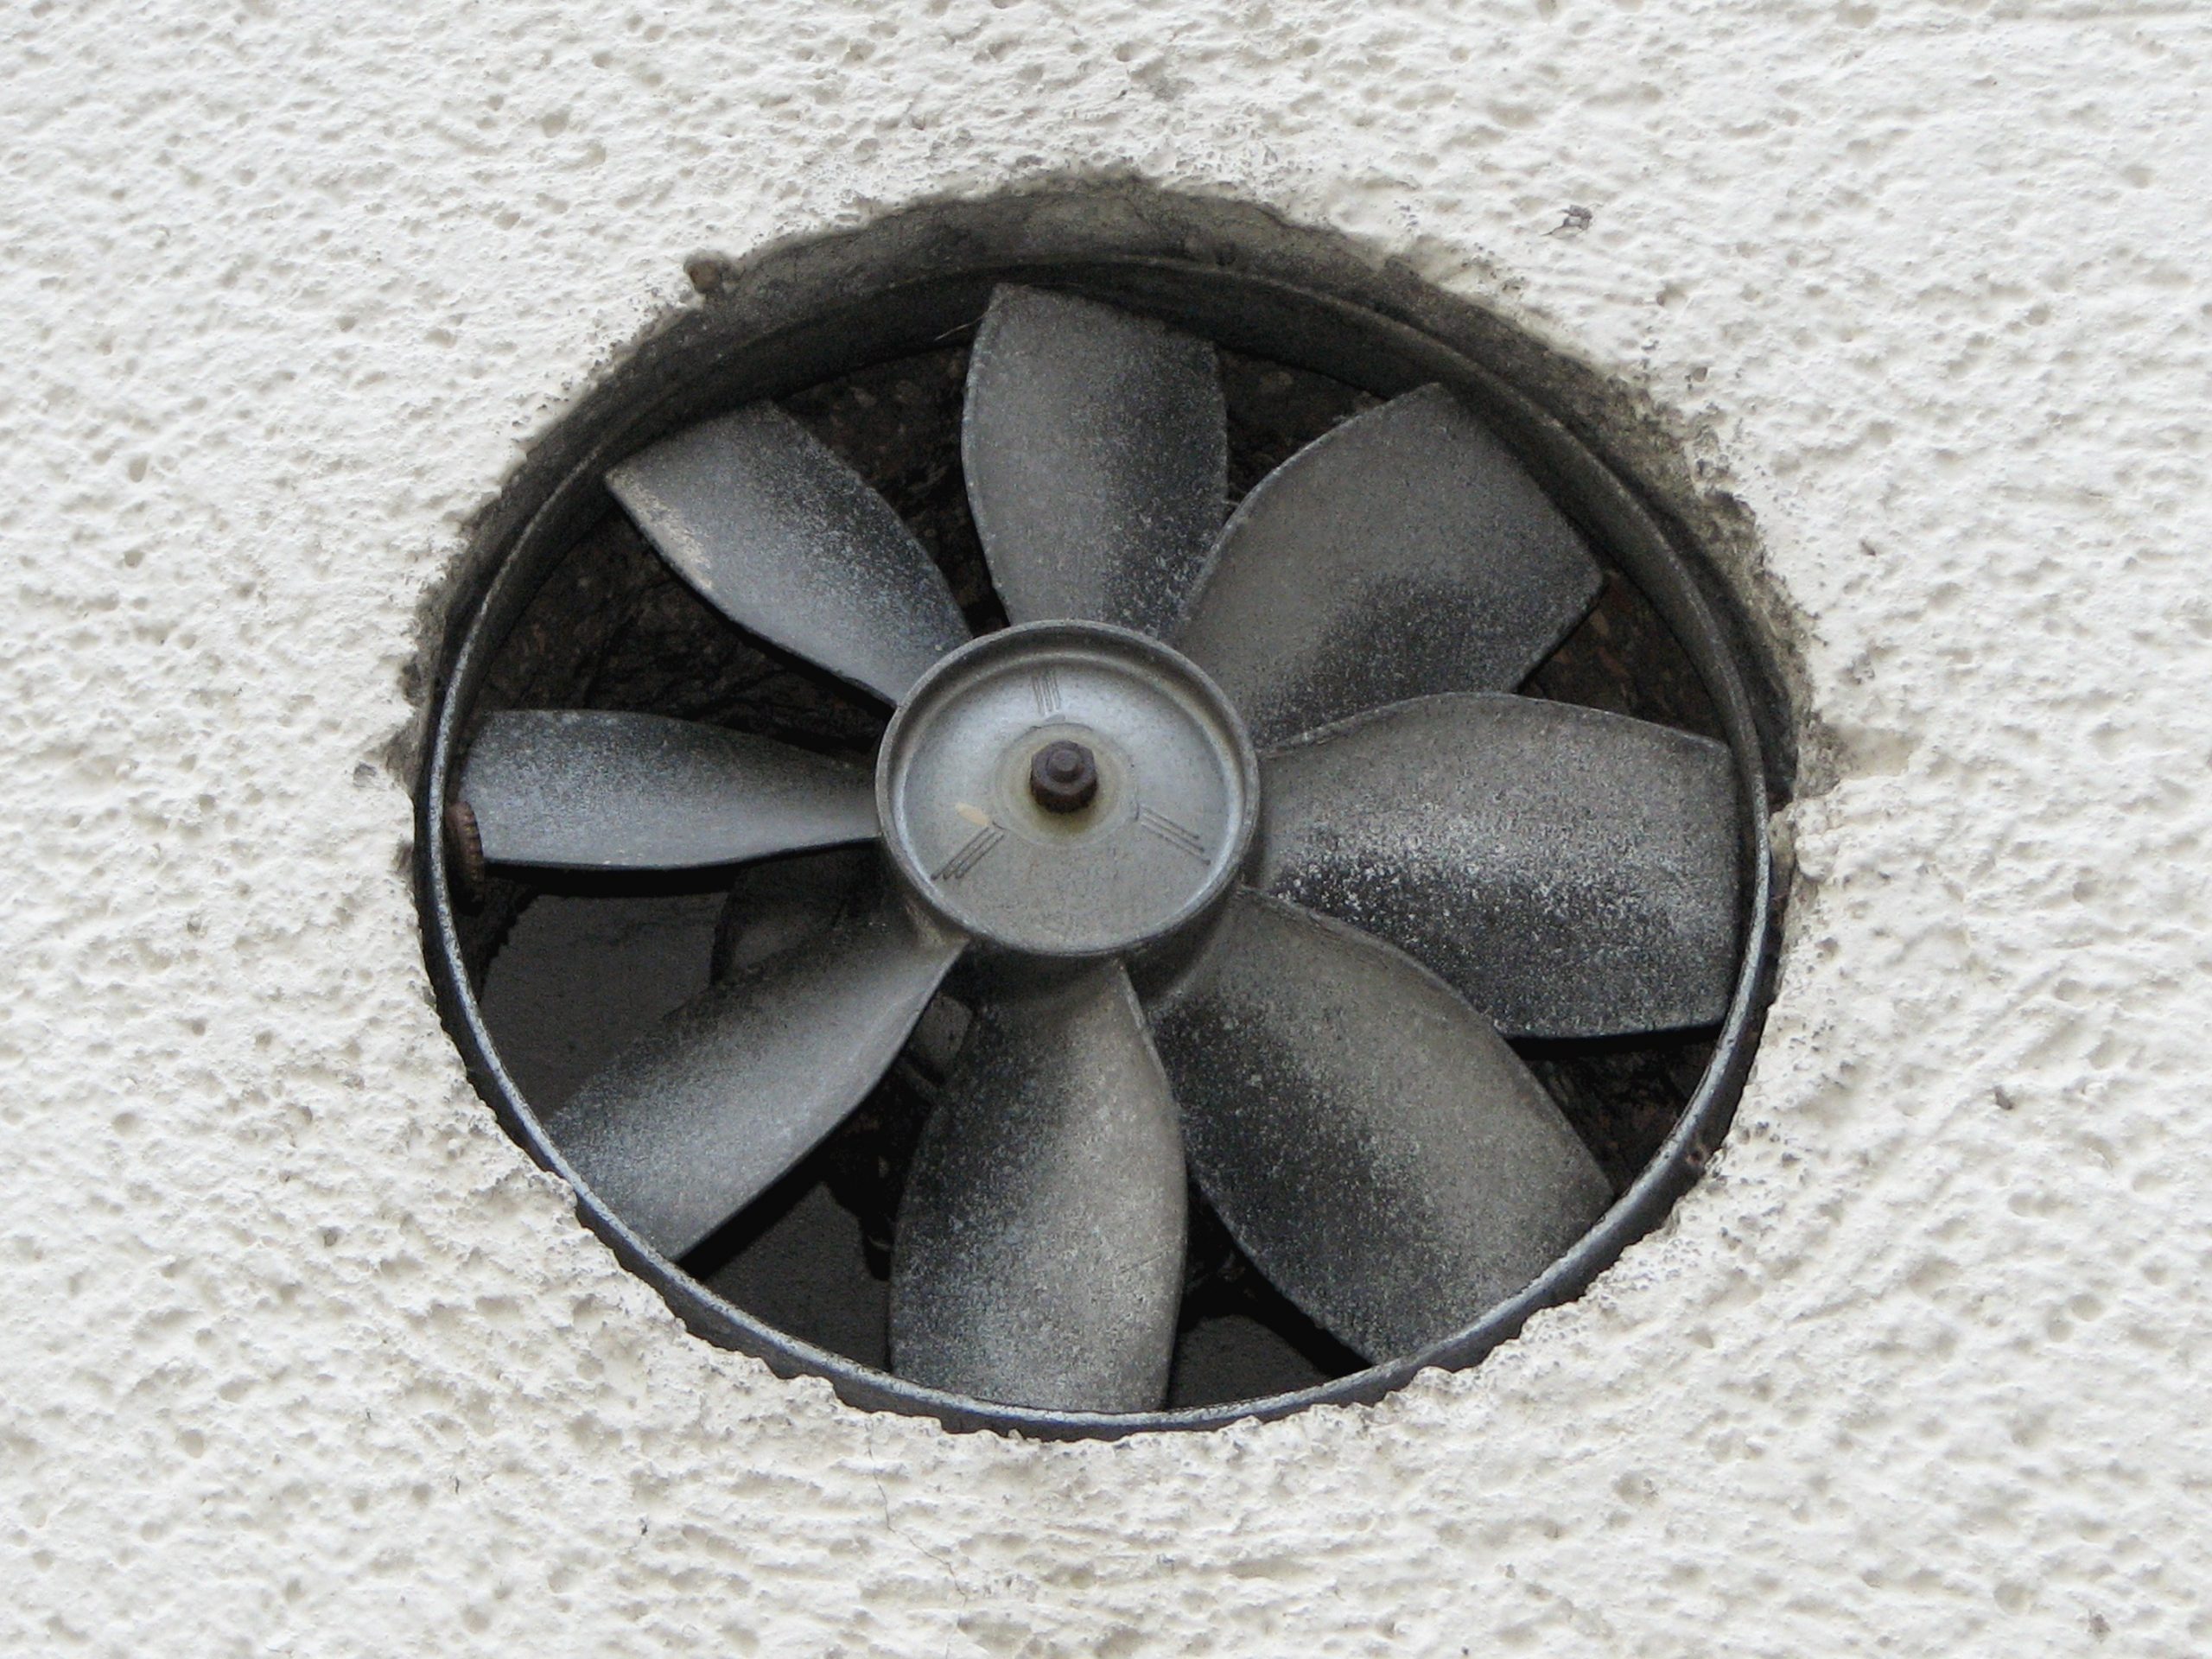 Cleaning The Exhaust Fan Simple Steps Ideas Mr Right for sizing 2816 X 2112